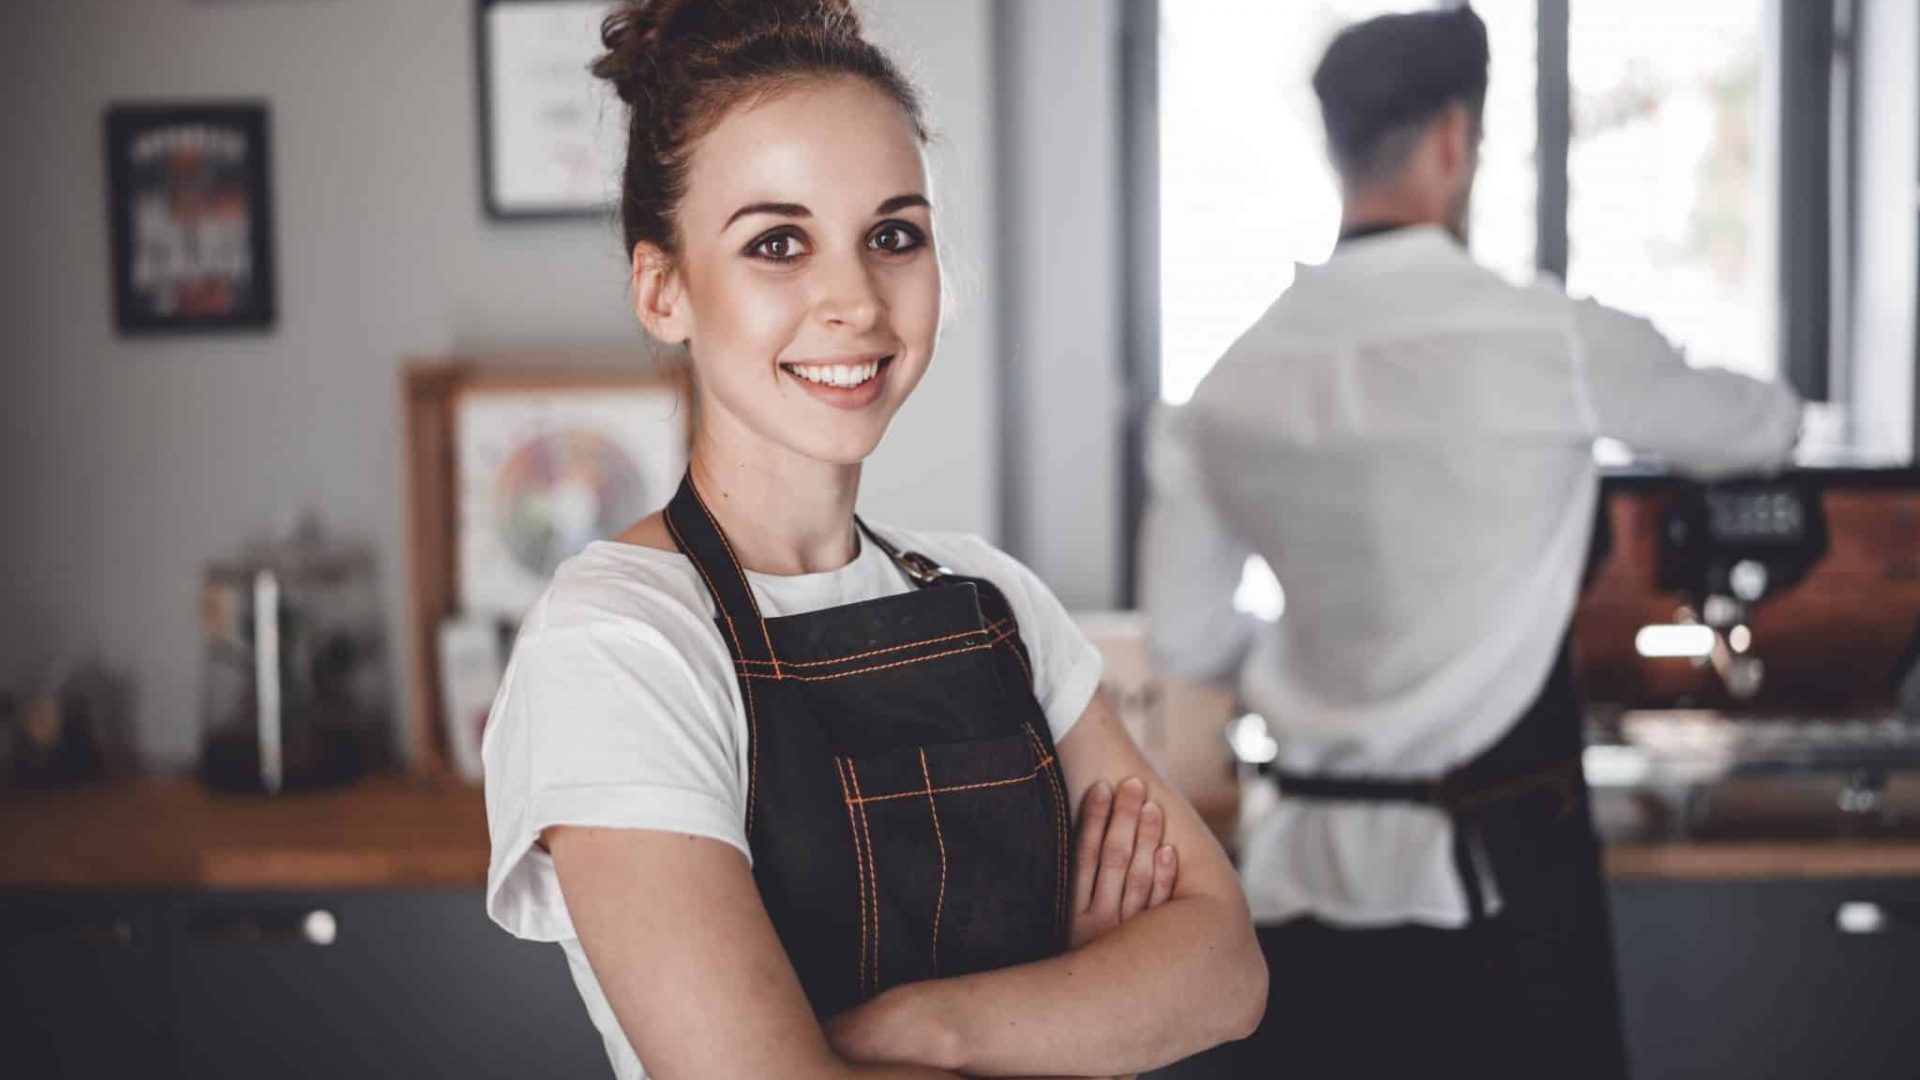 Smiling woman barista in apron, Coffee business owner